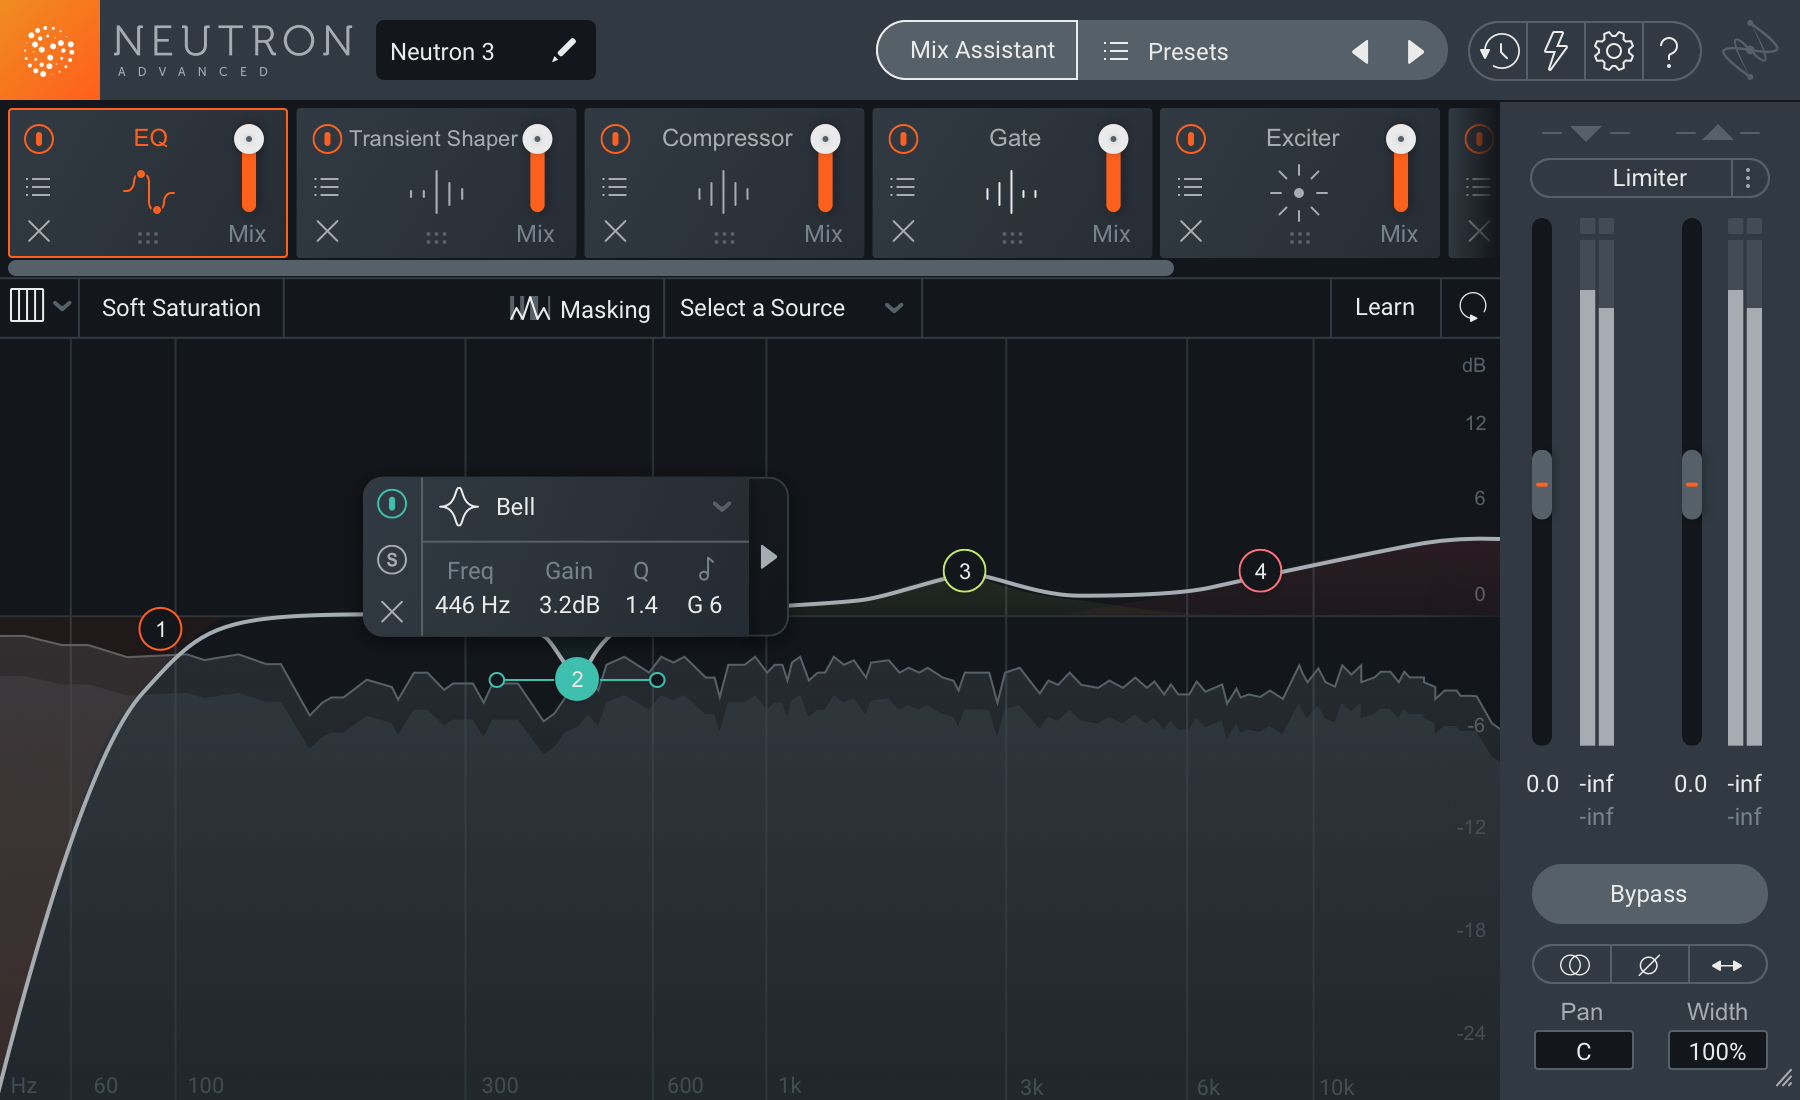 iZotope Neutron 3 Advanced Crossgrade from ANY paid iZotope Product